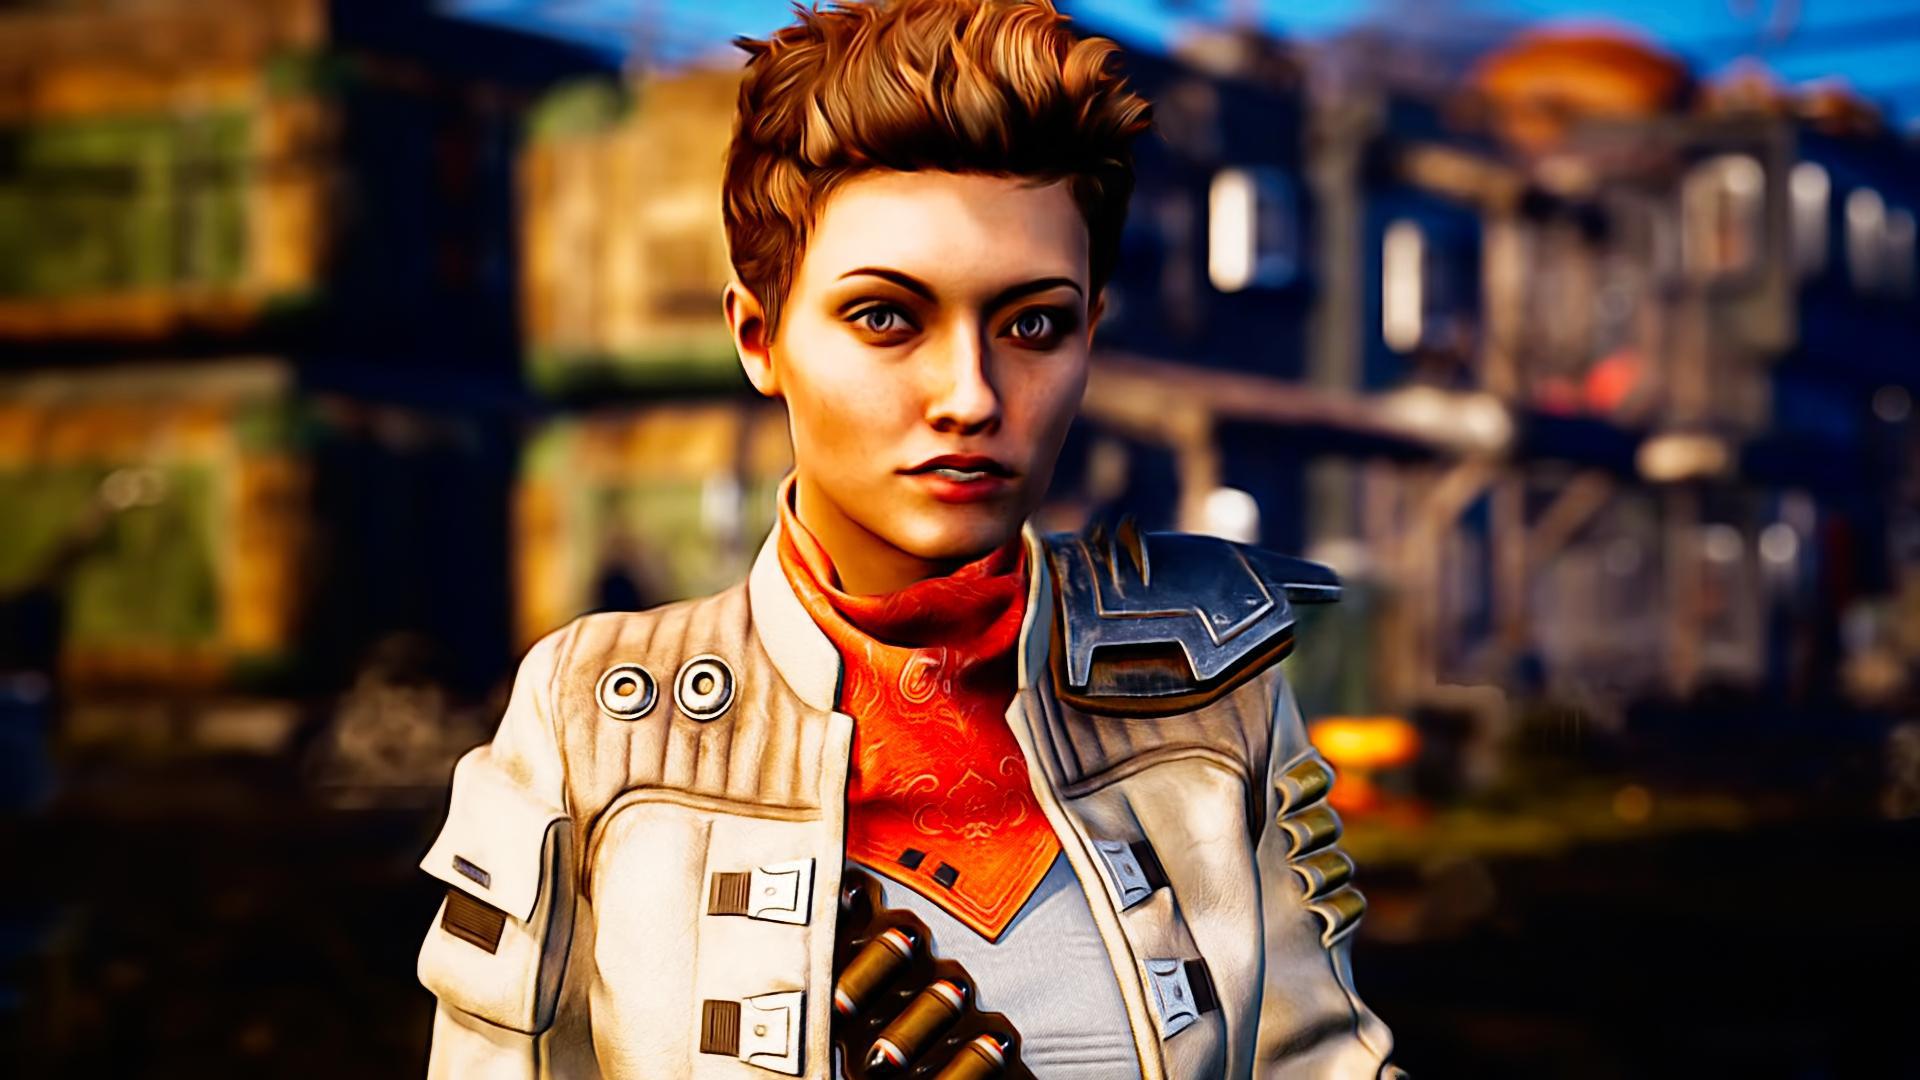 The Outer Worlds Looks A Lot Like Fallout But Thats Only Half The